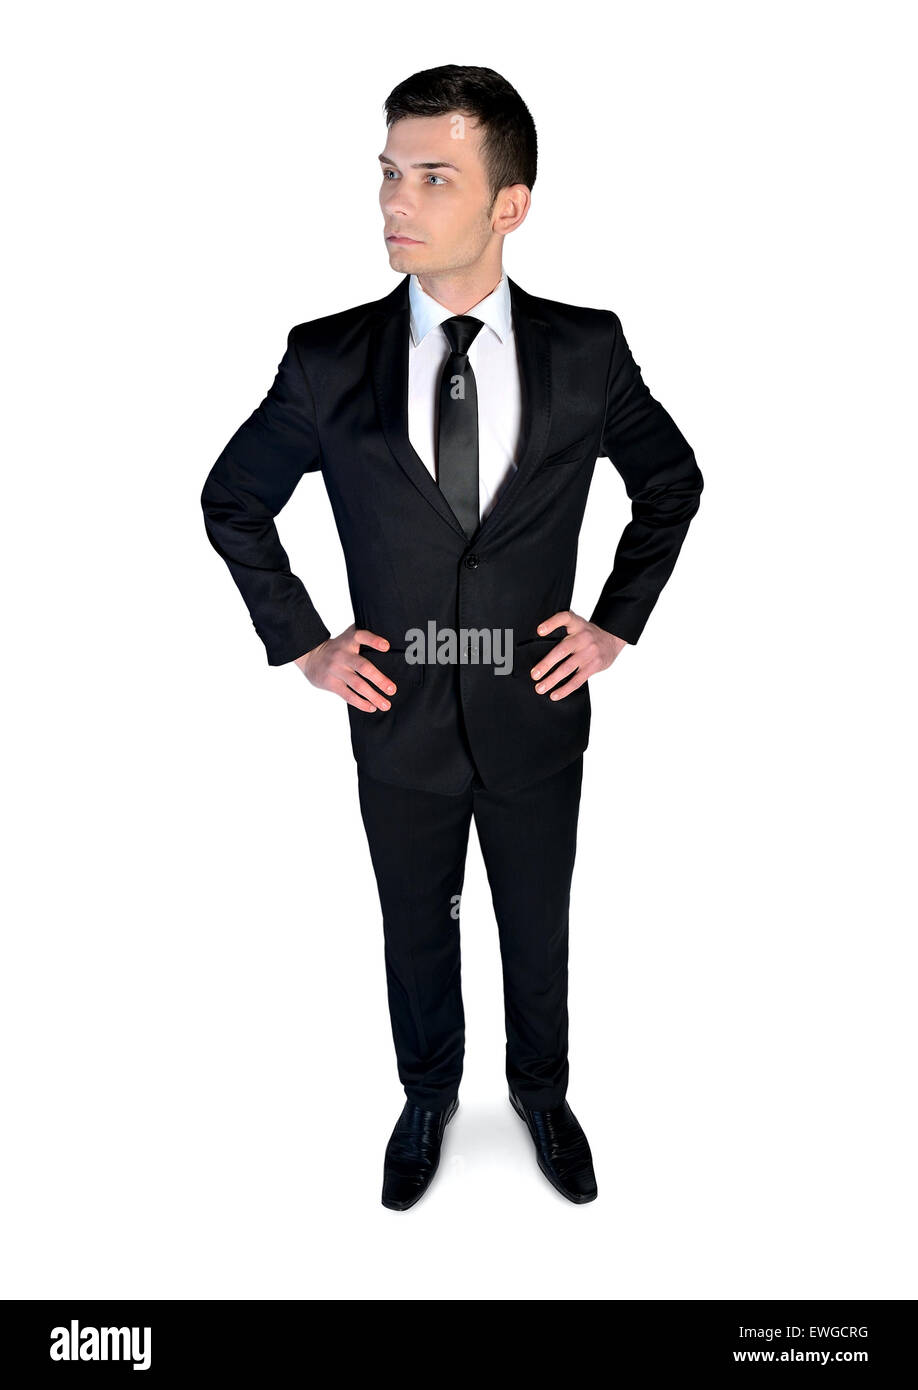 Isolated business man looking serious Stock Photo